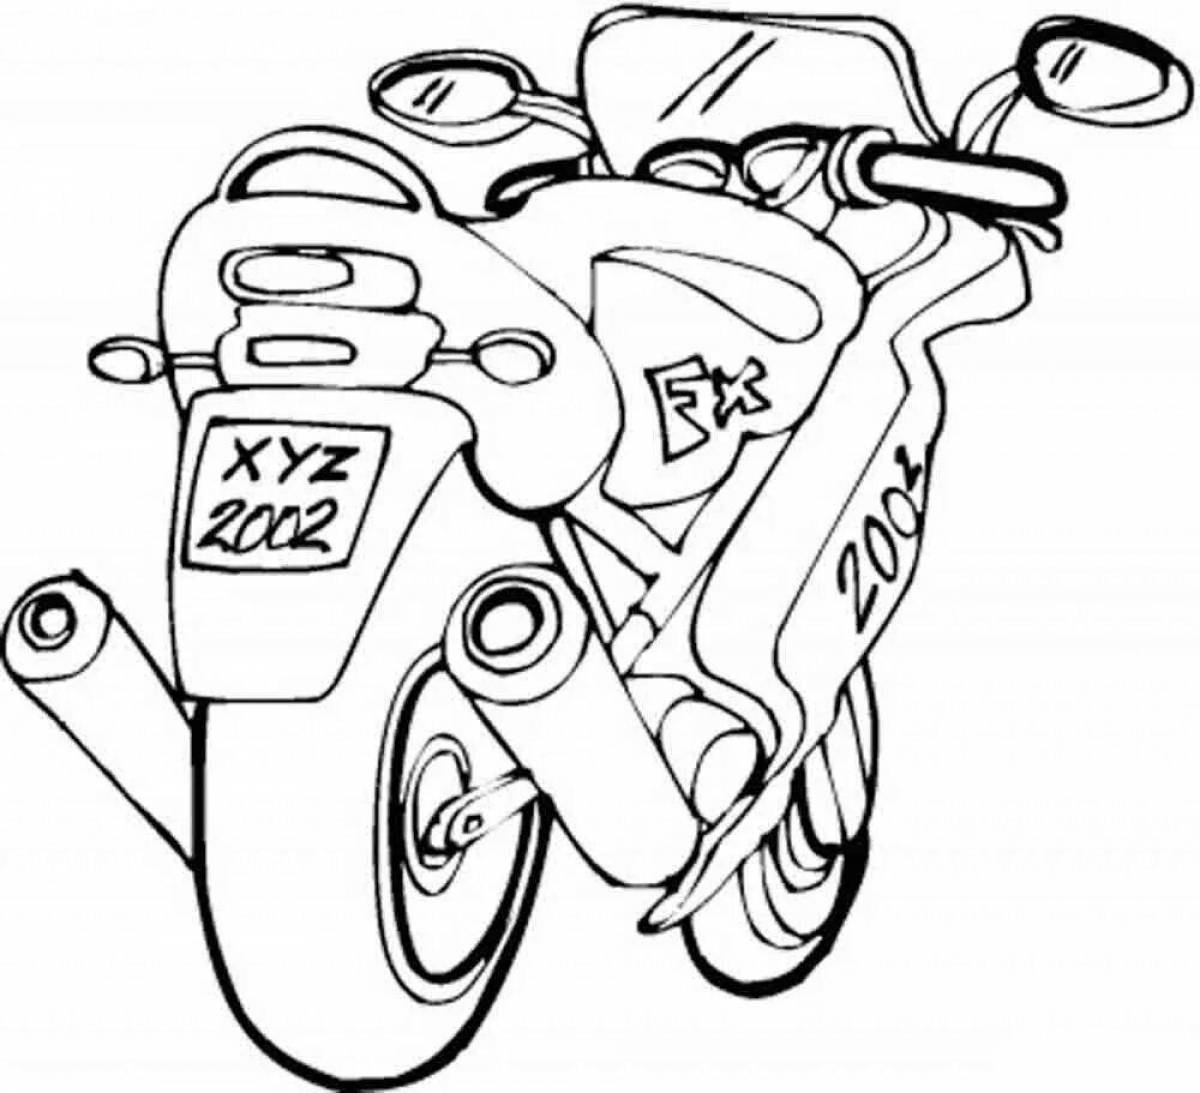 Funny motorcycle coloring book for 7 year olds